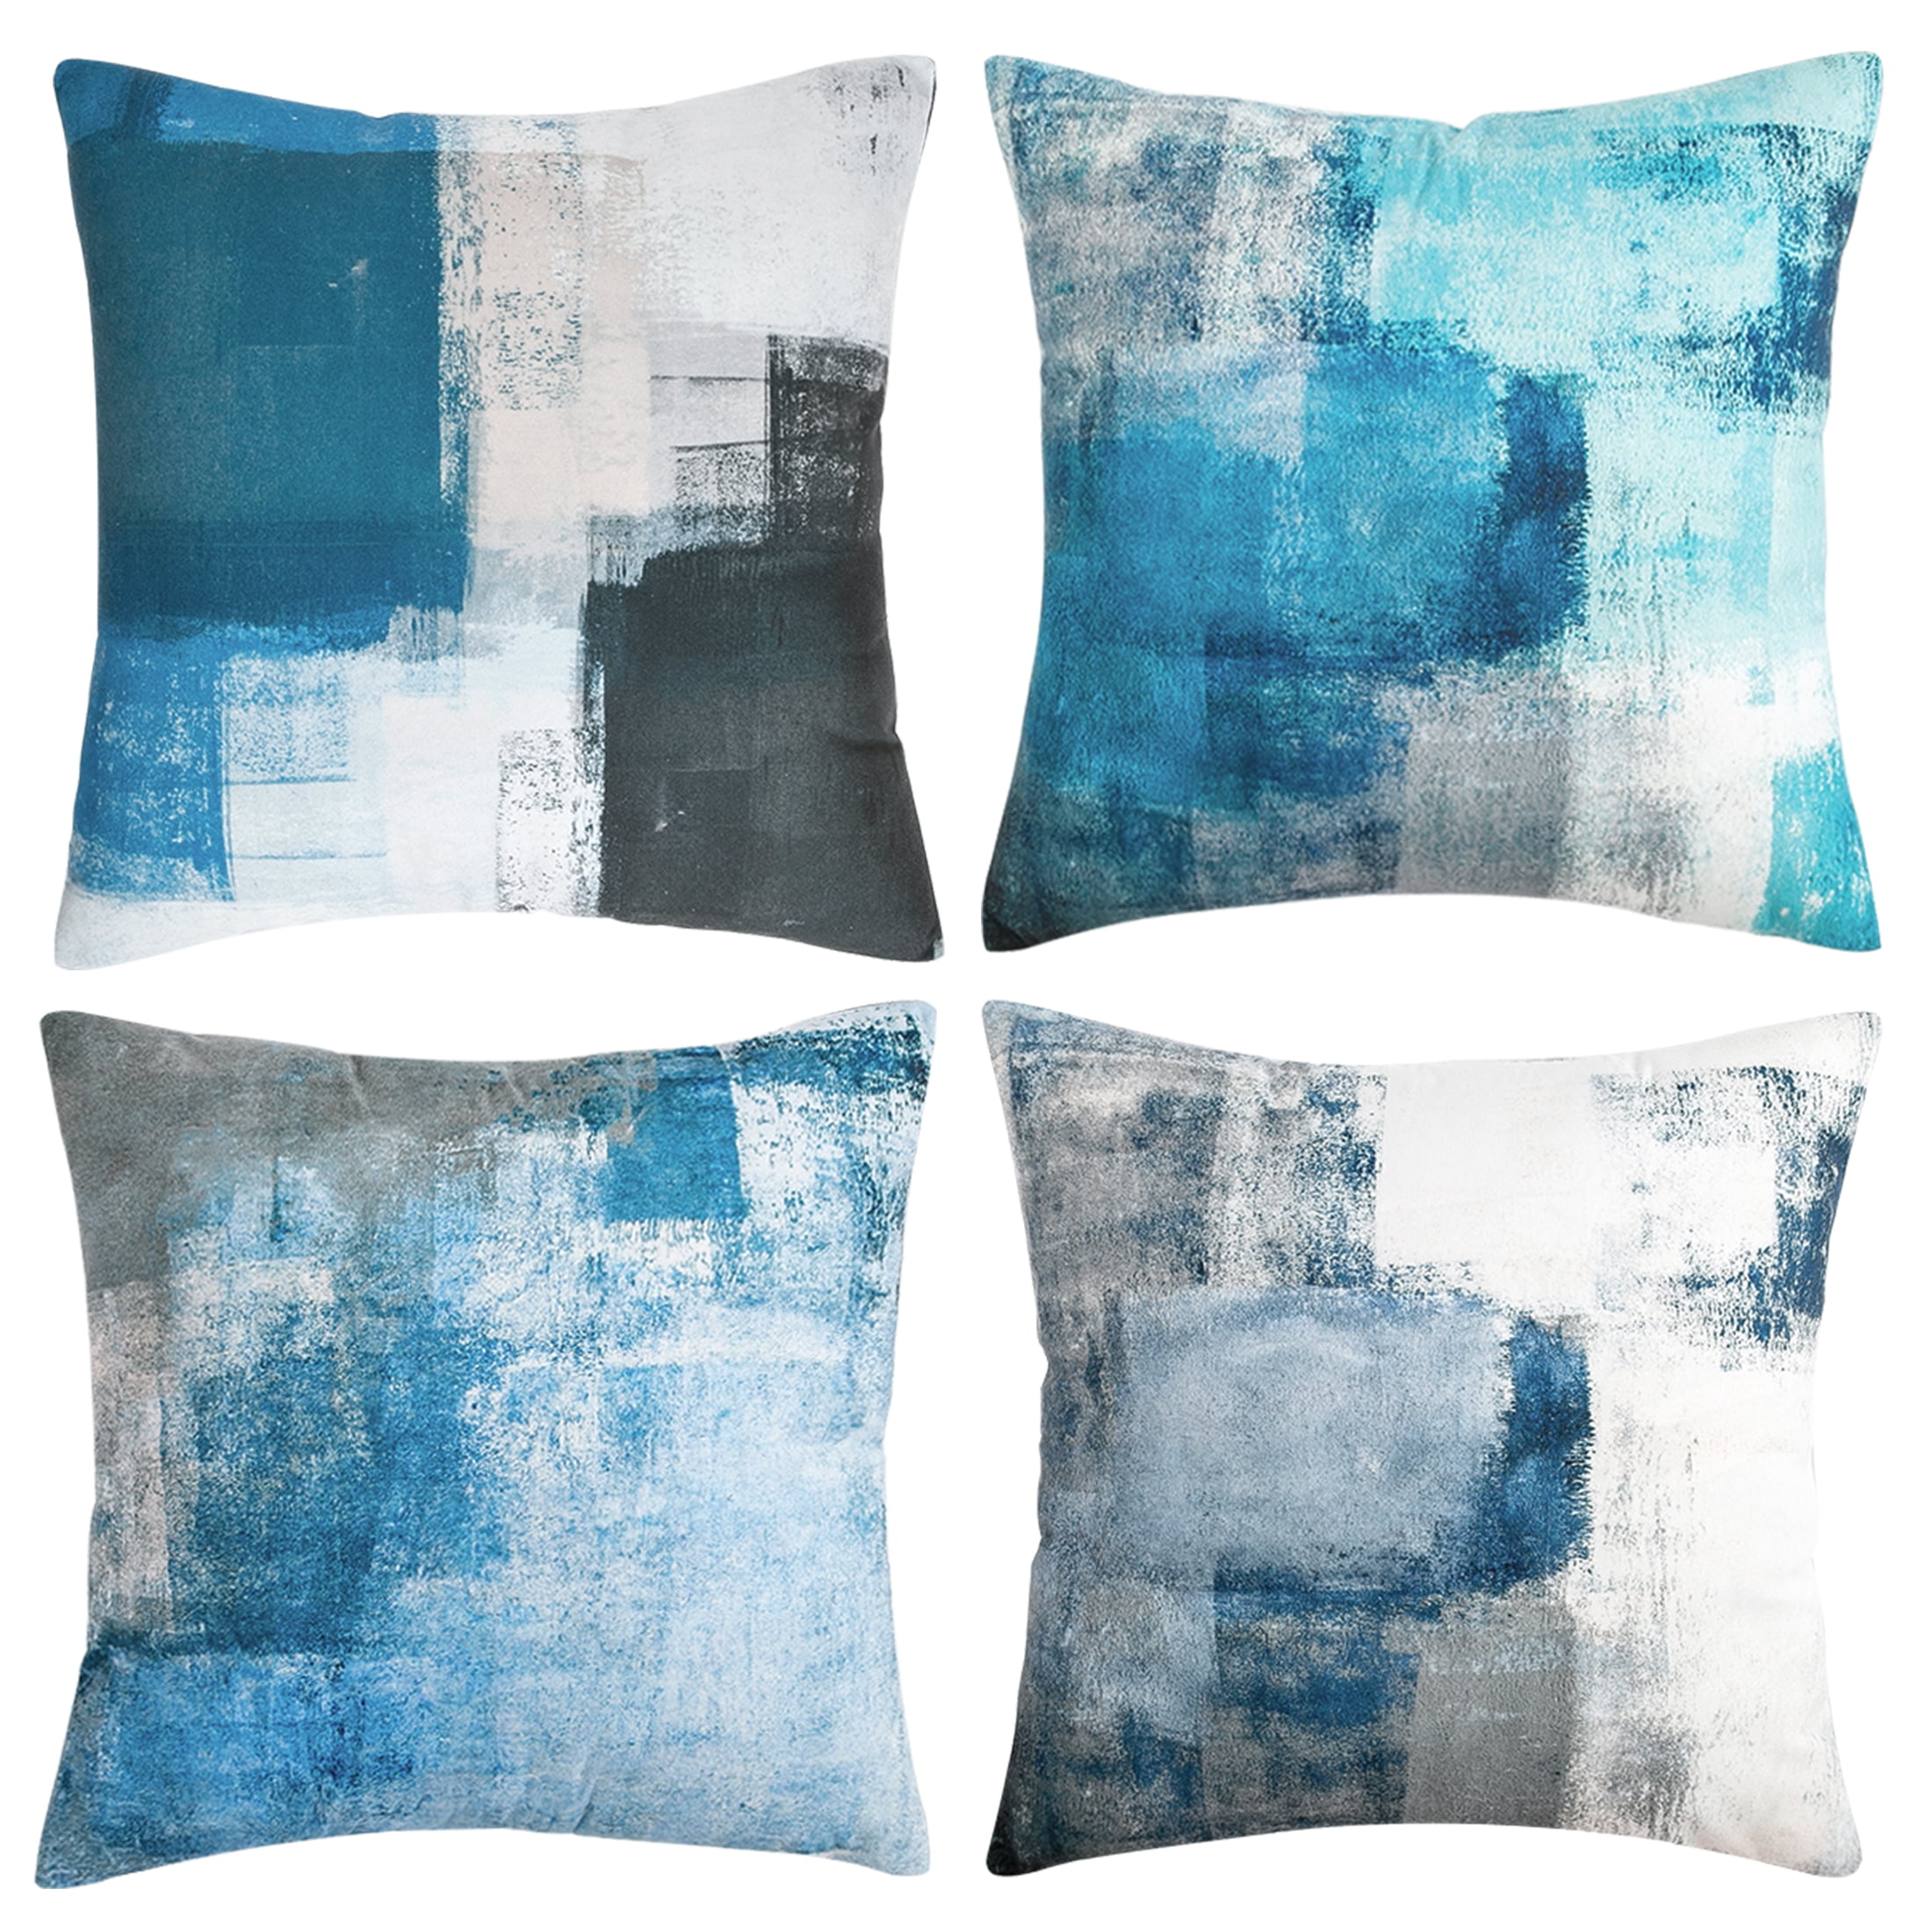 Navy Blue & Teal Throw Pillows Small Decorative Accent Pillow for Bed  Decor, Large Sofa Cushions or Blue Outdoor Couch Pillows 